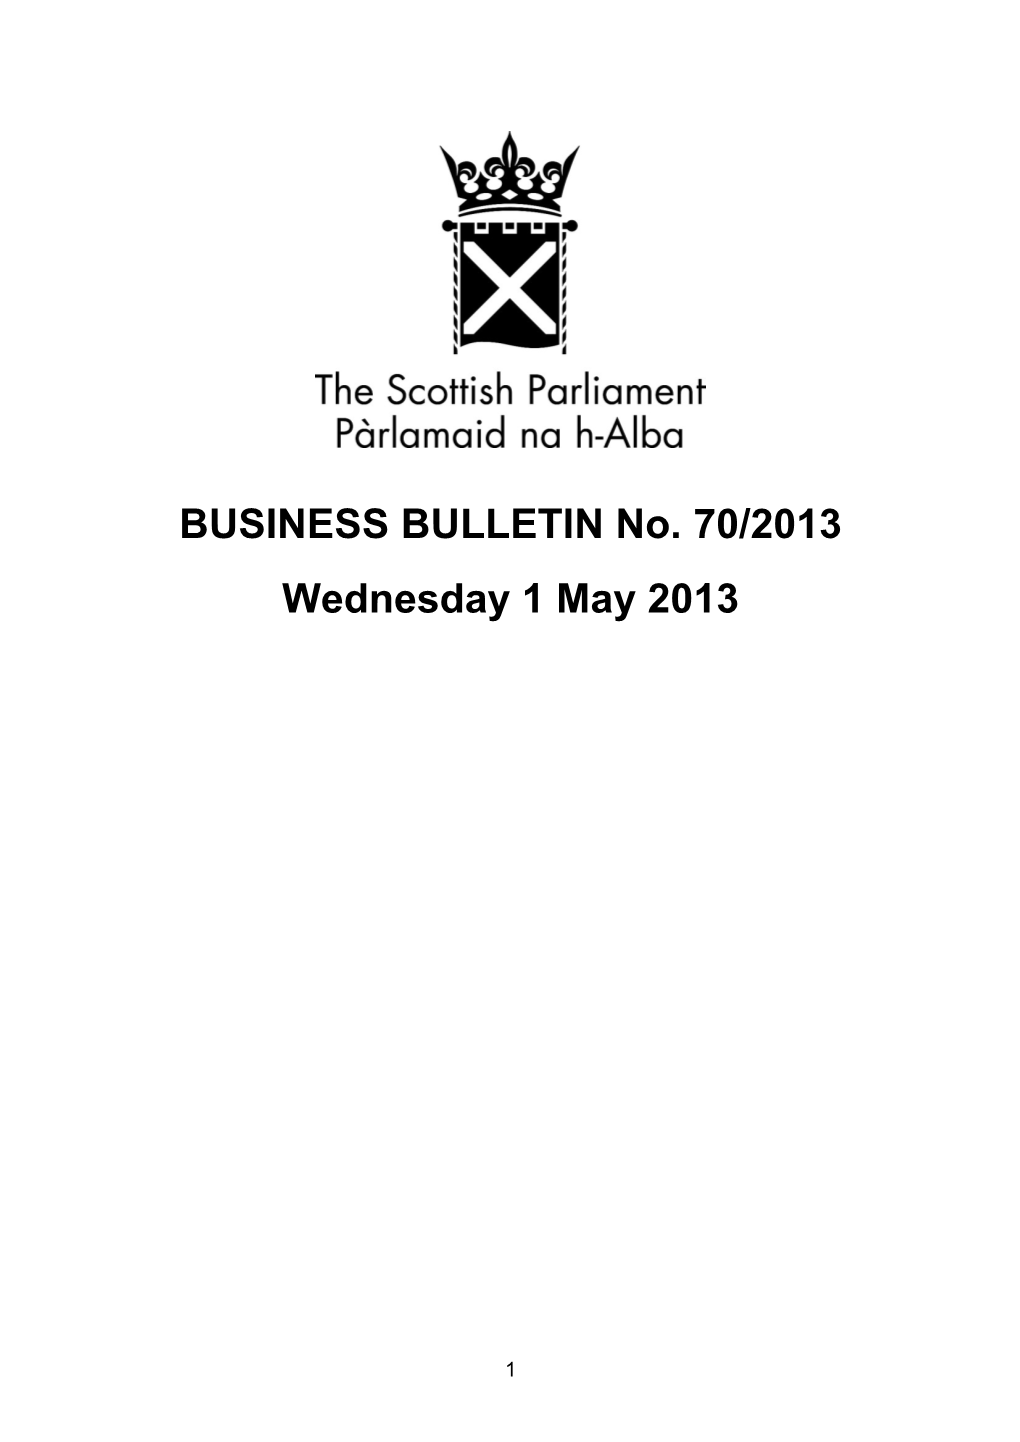 BUSINESS BULLETIN No. 70/2013 Wednesday 1 May 2013